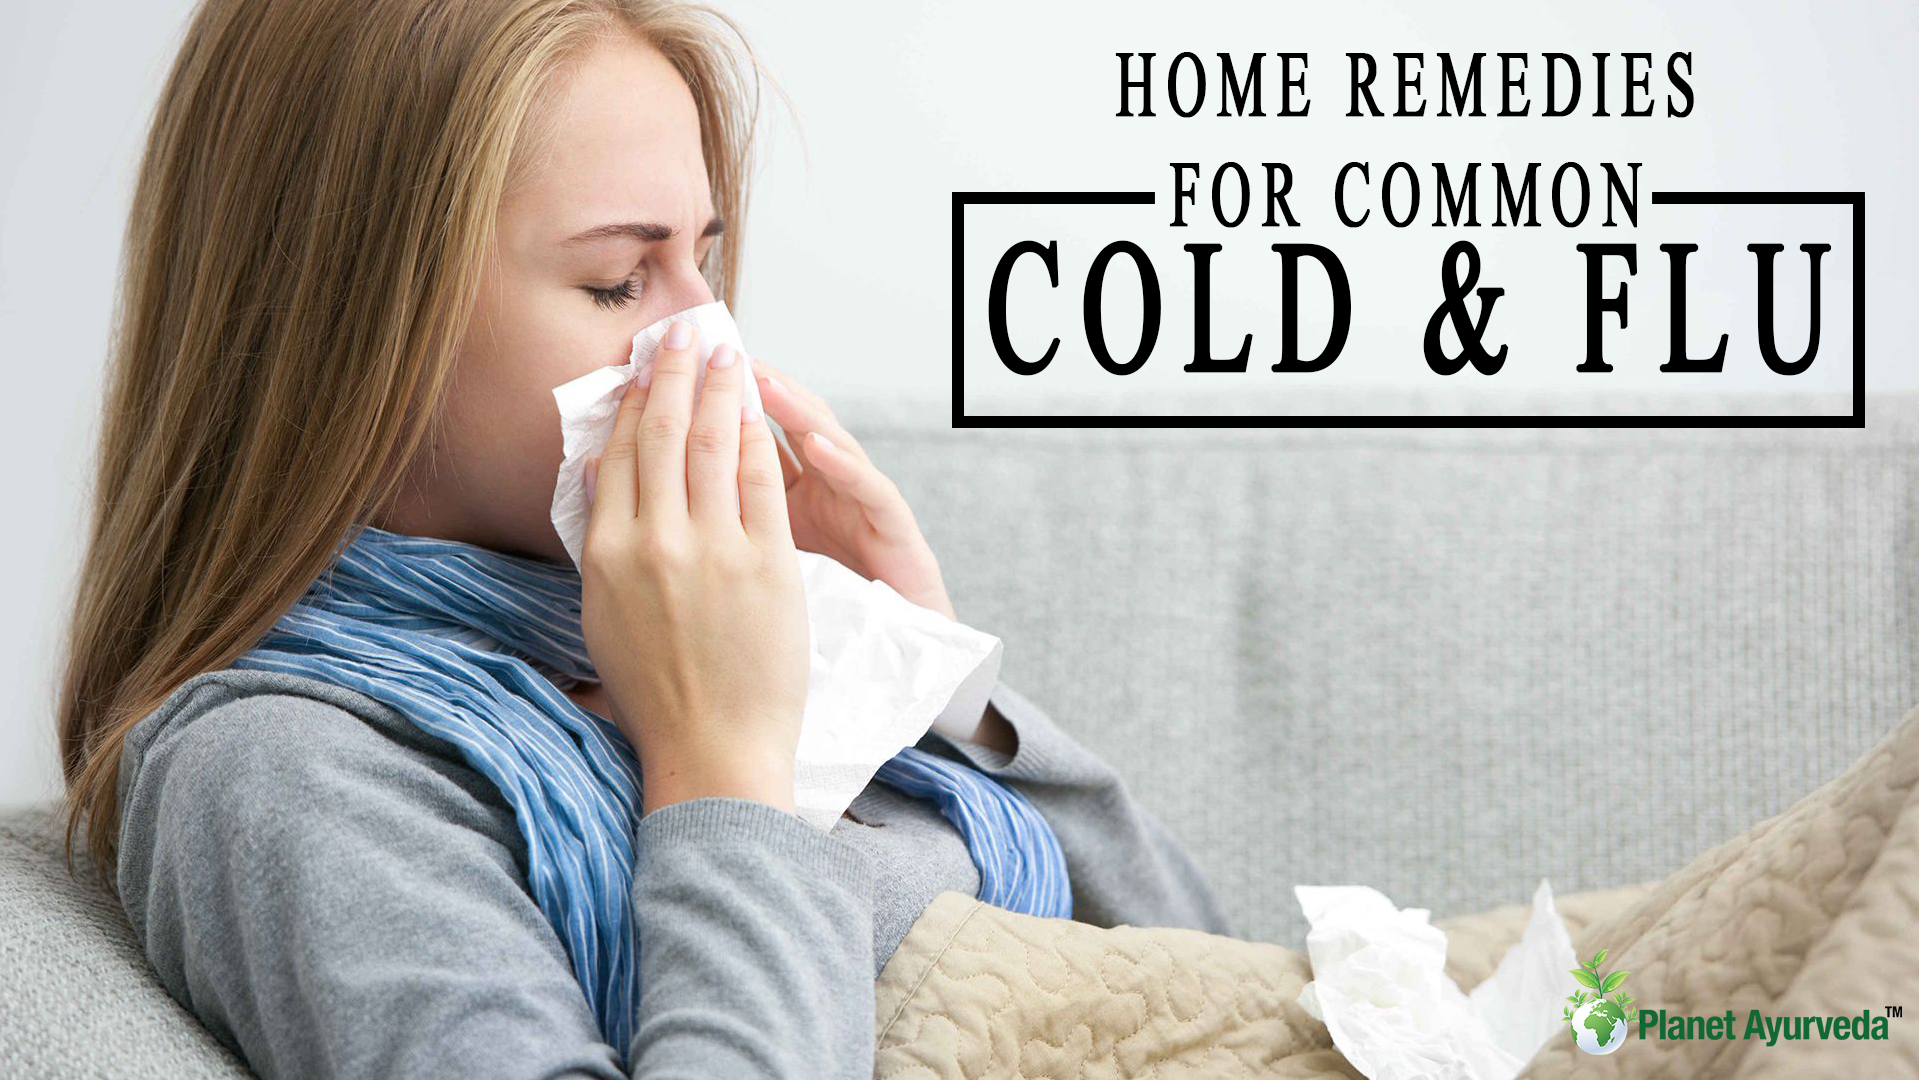 Home Remedies for Common Cold & Flu